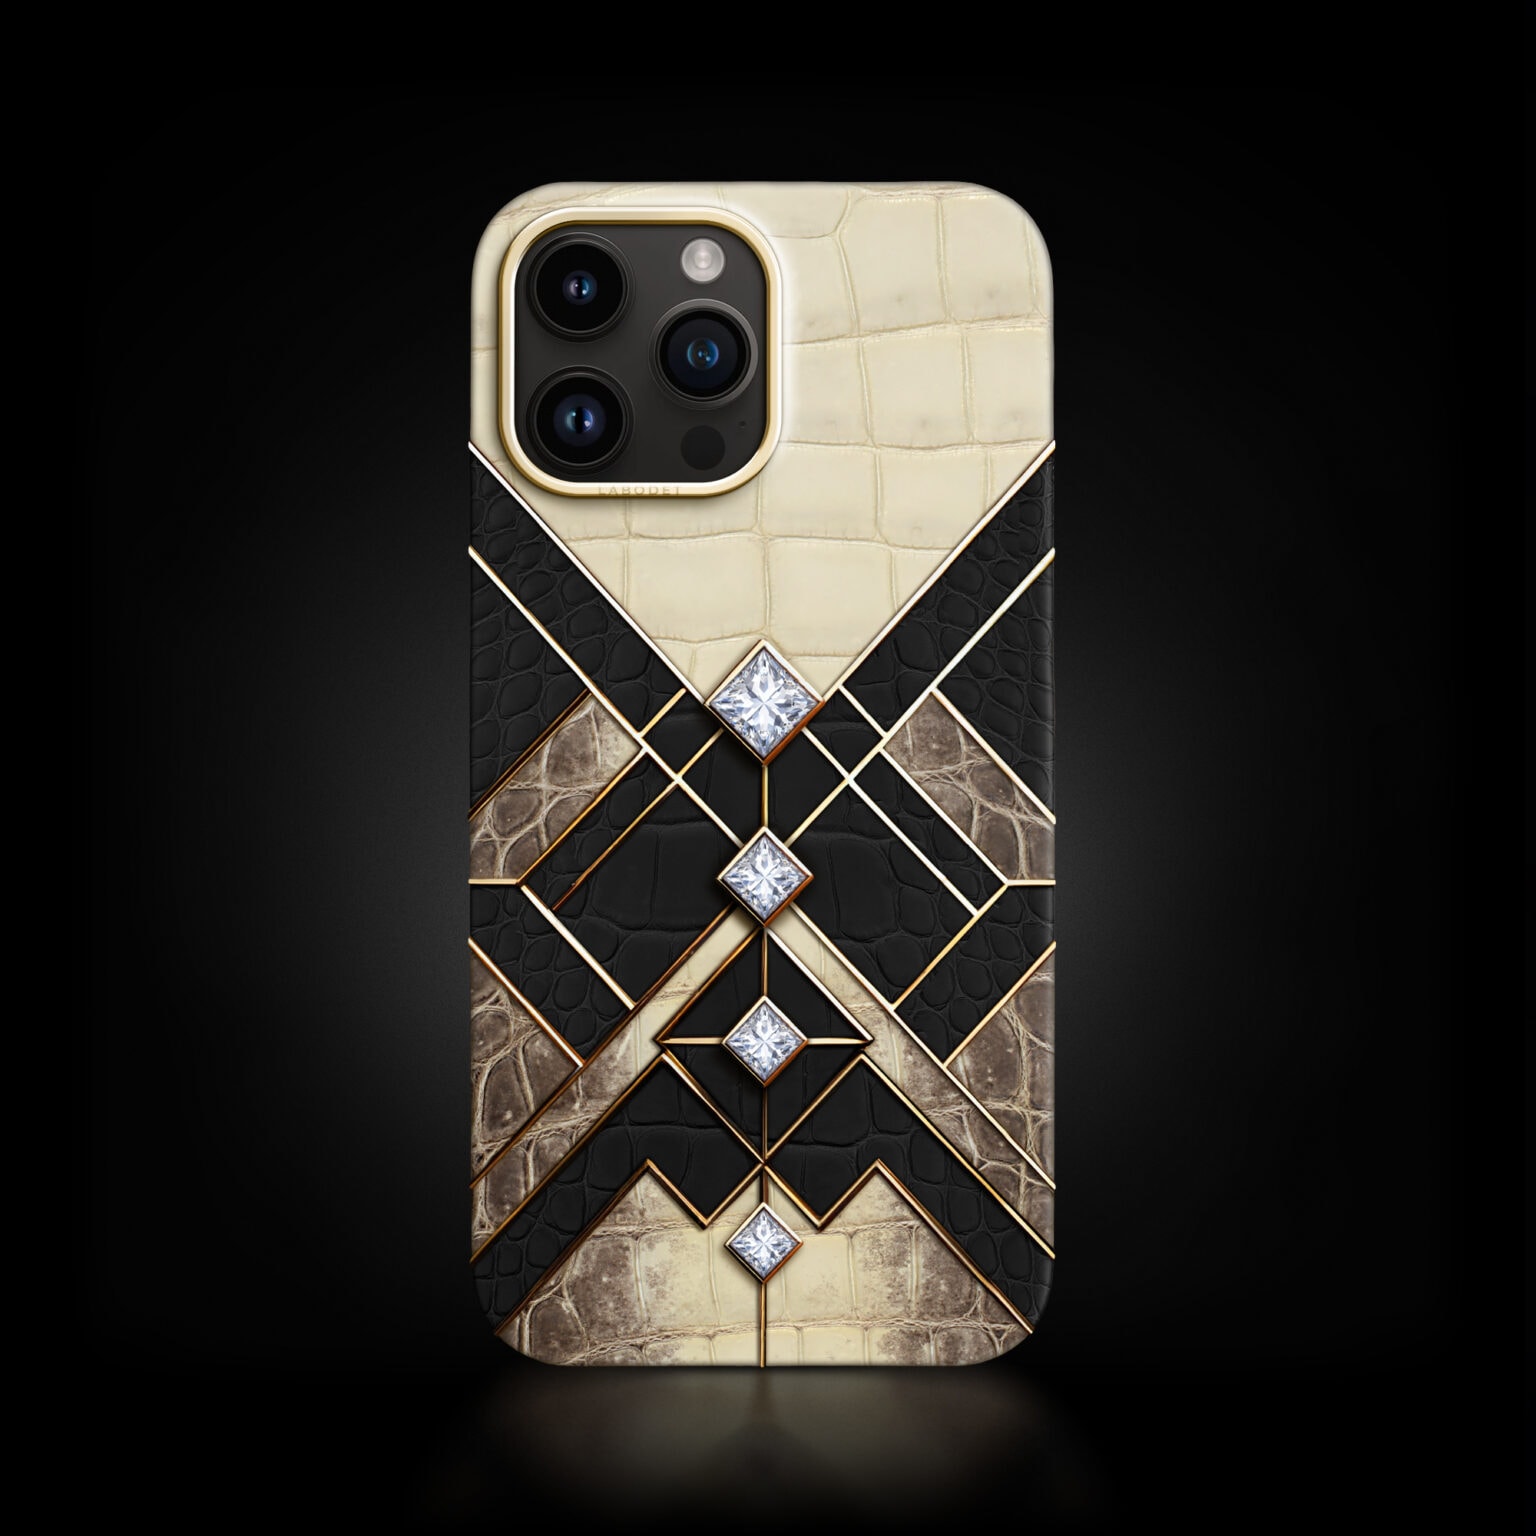 An AI-designed iPhone case by Labodét with crocodile and alligator leather, diamonds and gold detailing.